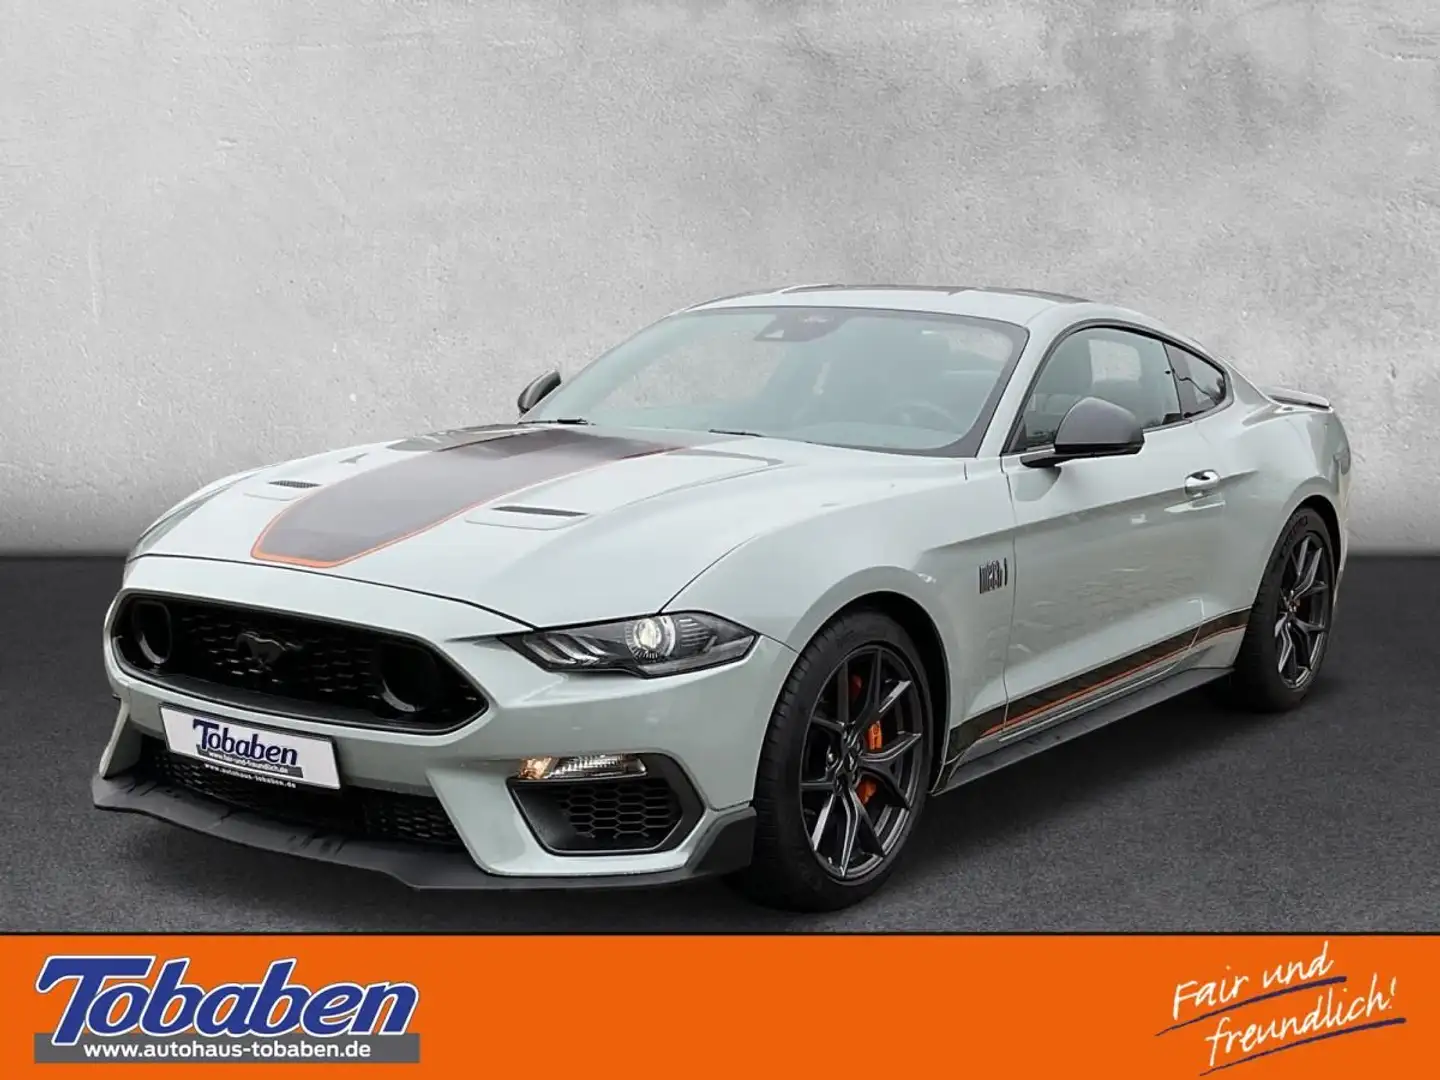 Ford Mustang MACH 1 5.0 Ti-VCT V8 338kW Auto Coupe, Grigio - 1